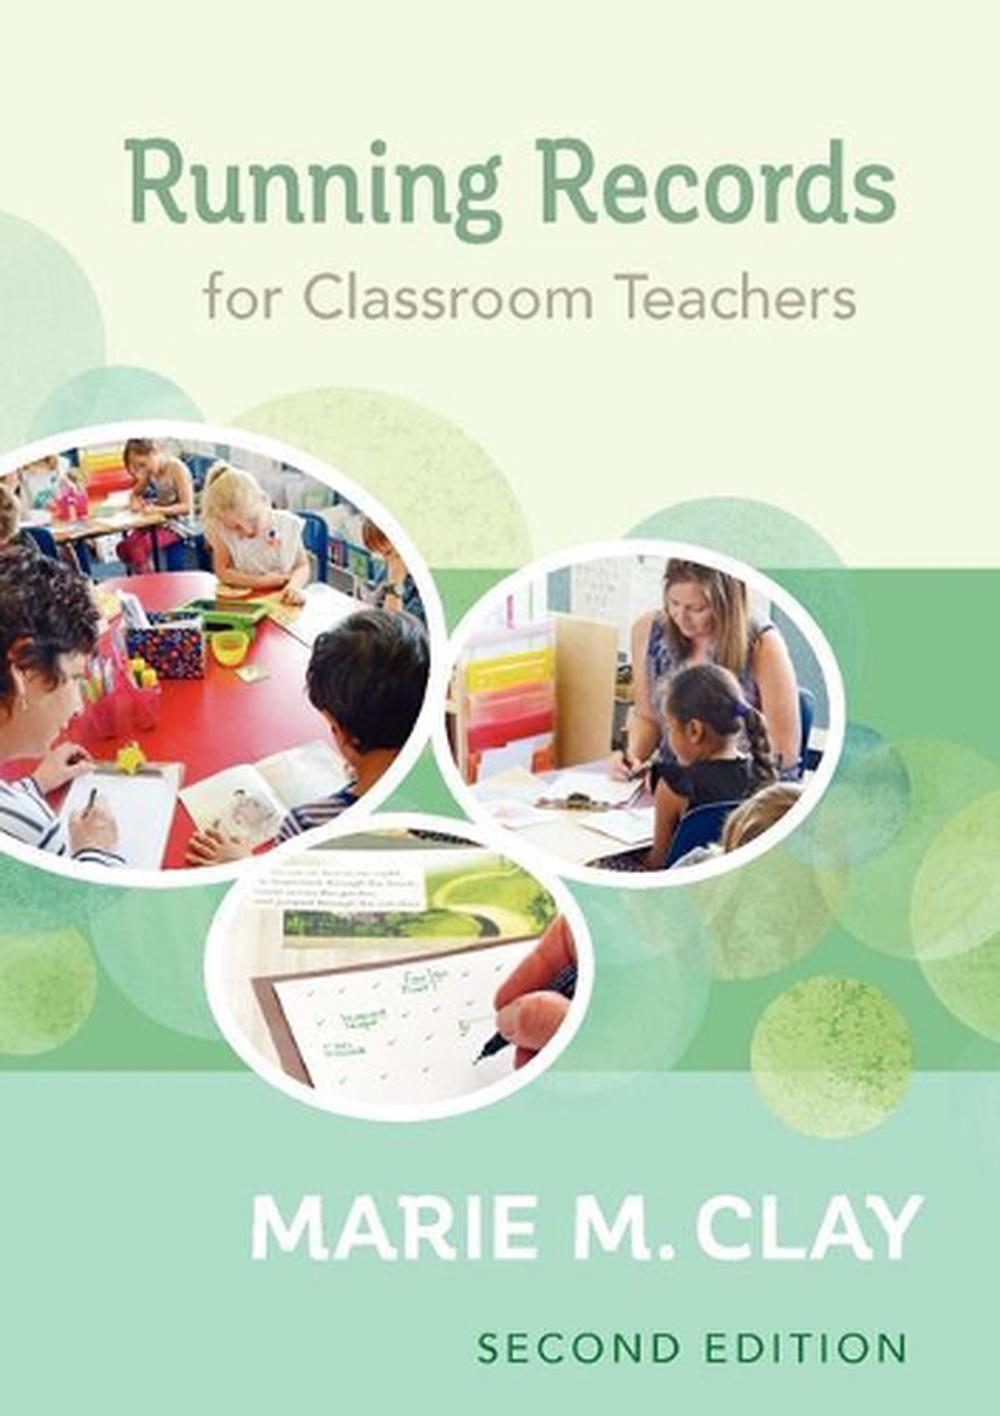 running-records-for-classroom-teachers-second-edition-by-marie-clay-english-p-9780325092799